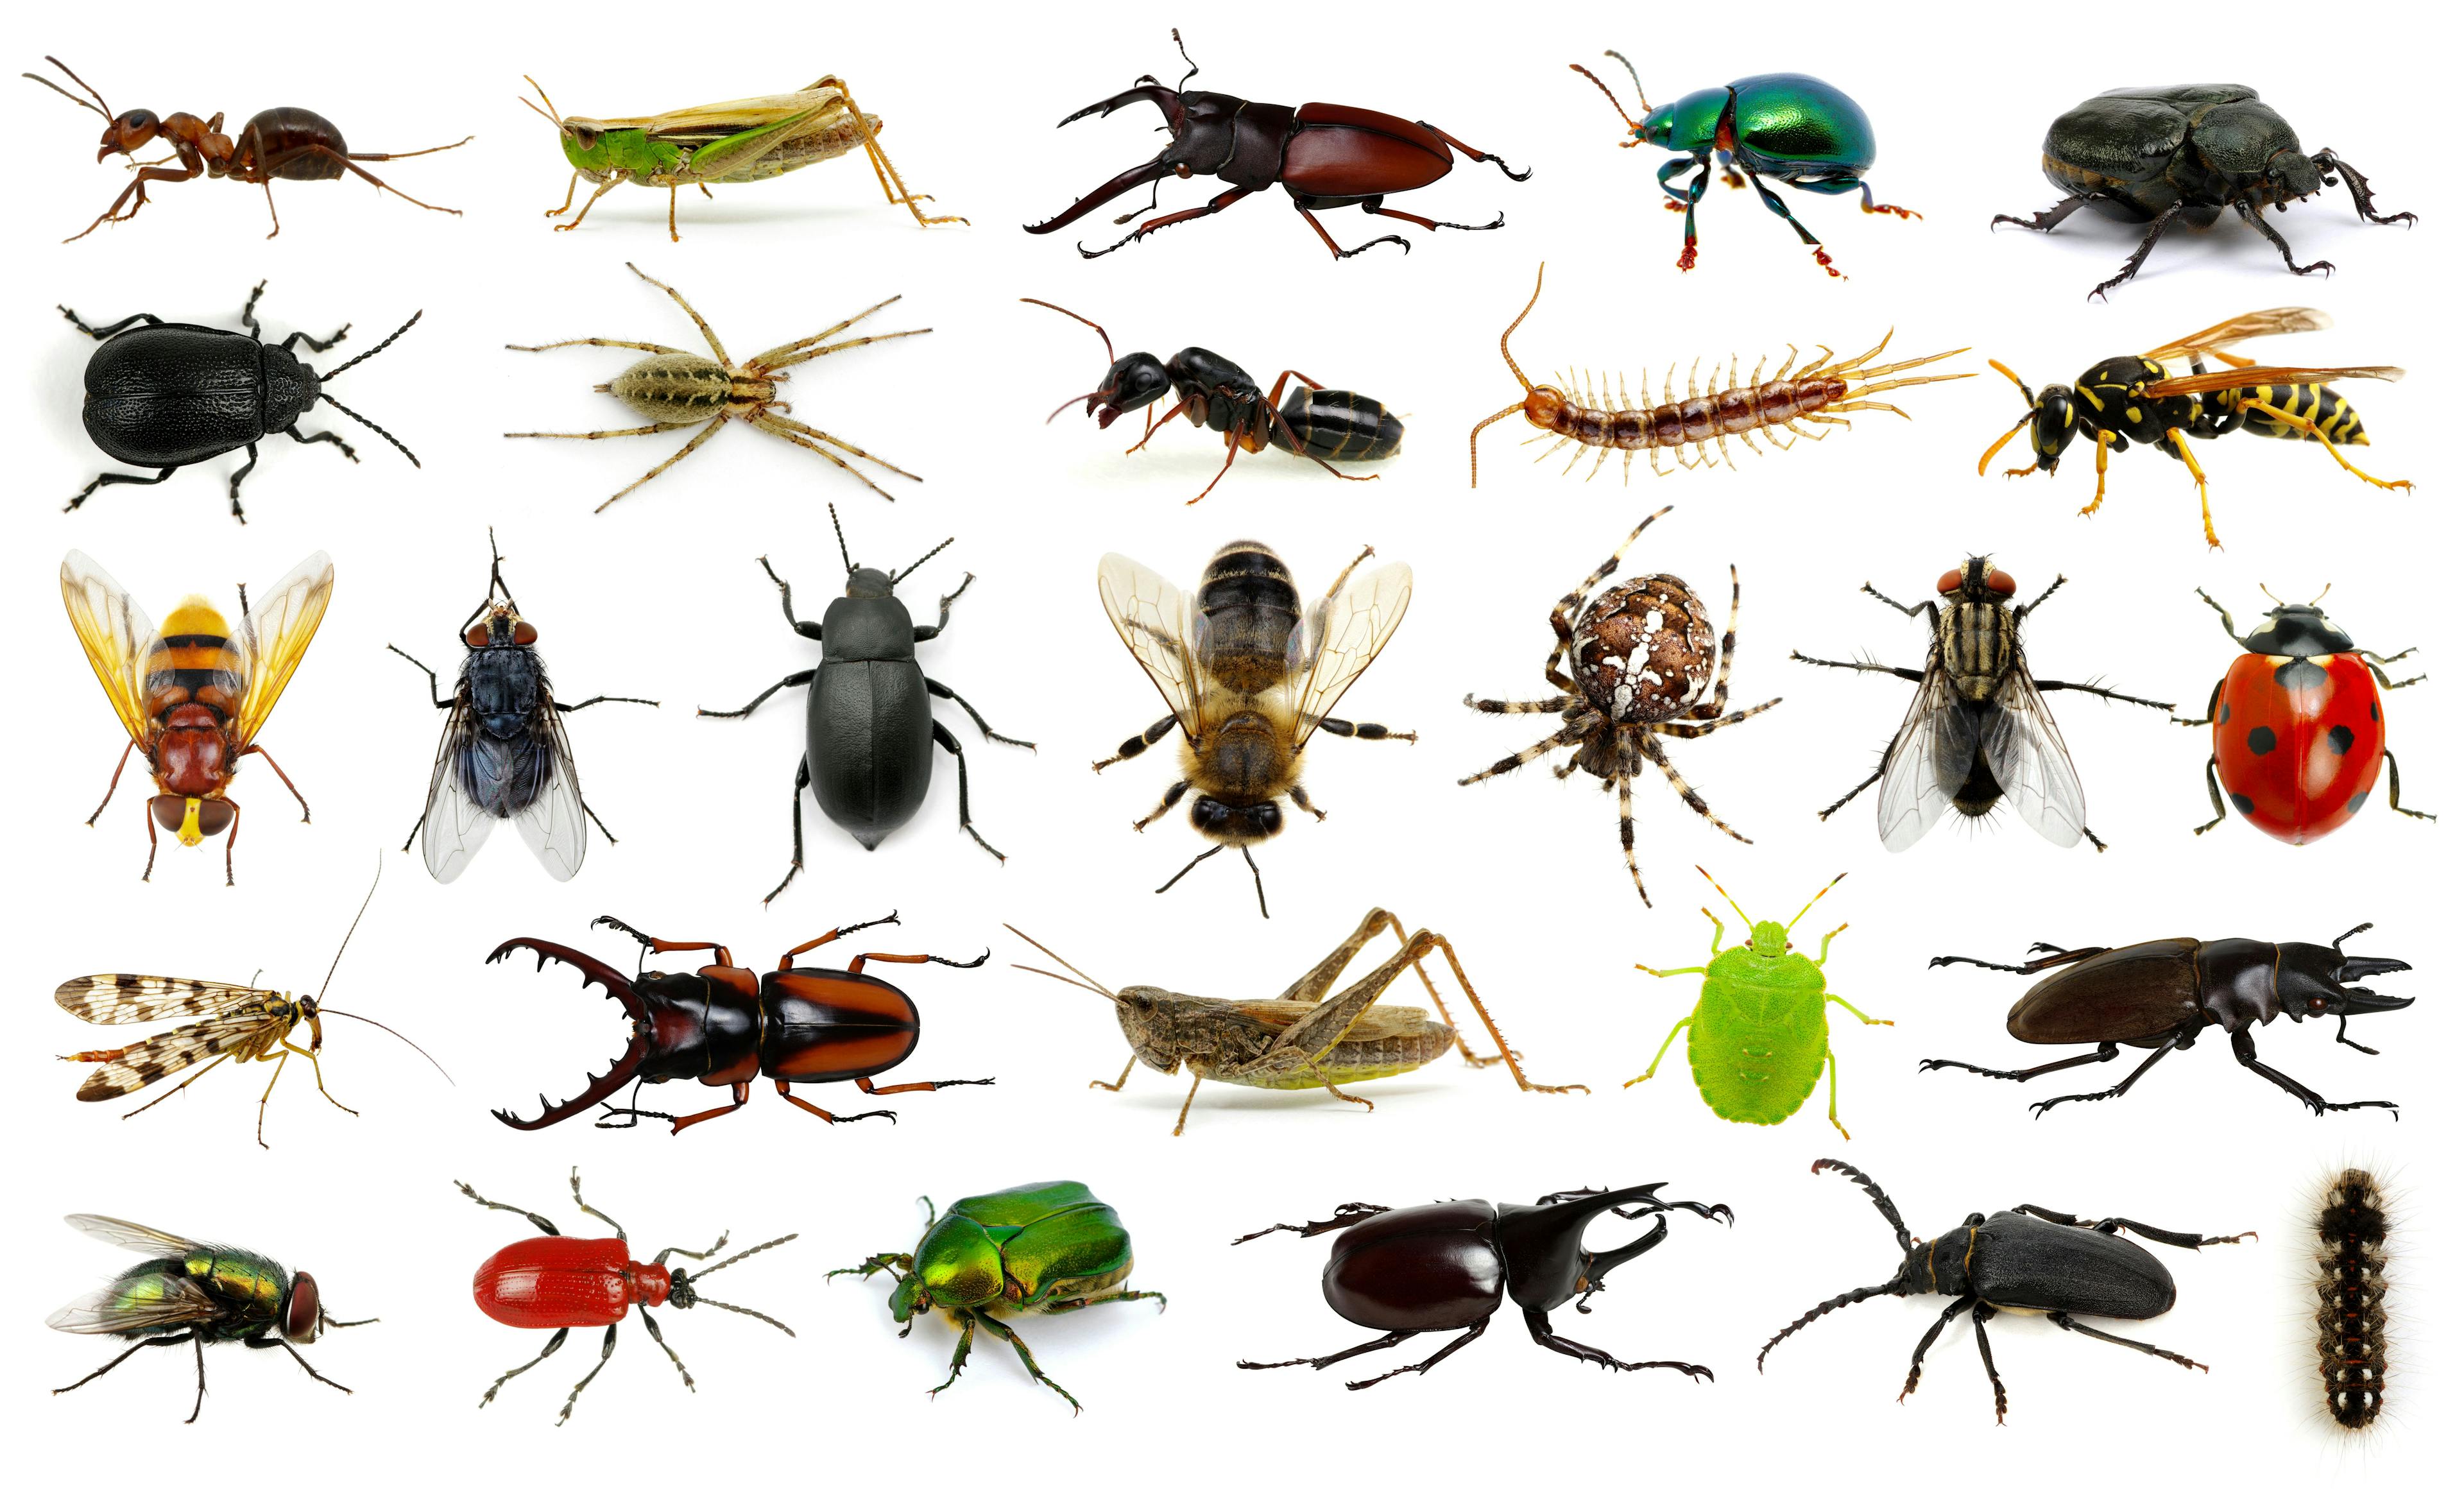 Set of insects | Image Credit: © Alekss - stock.adobe.com